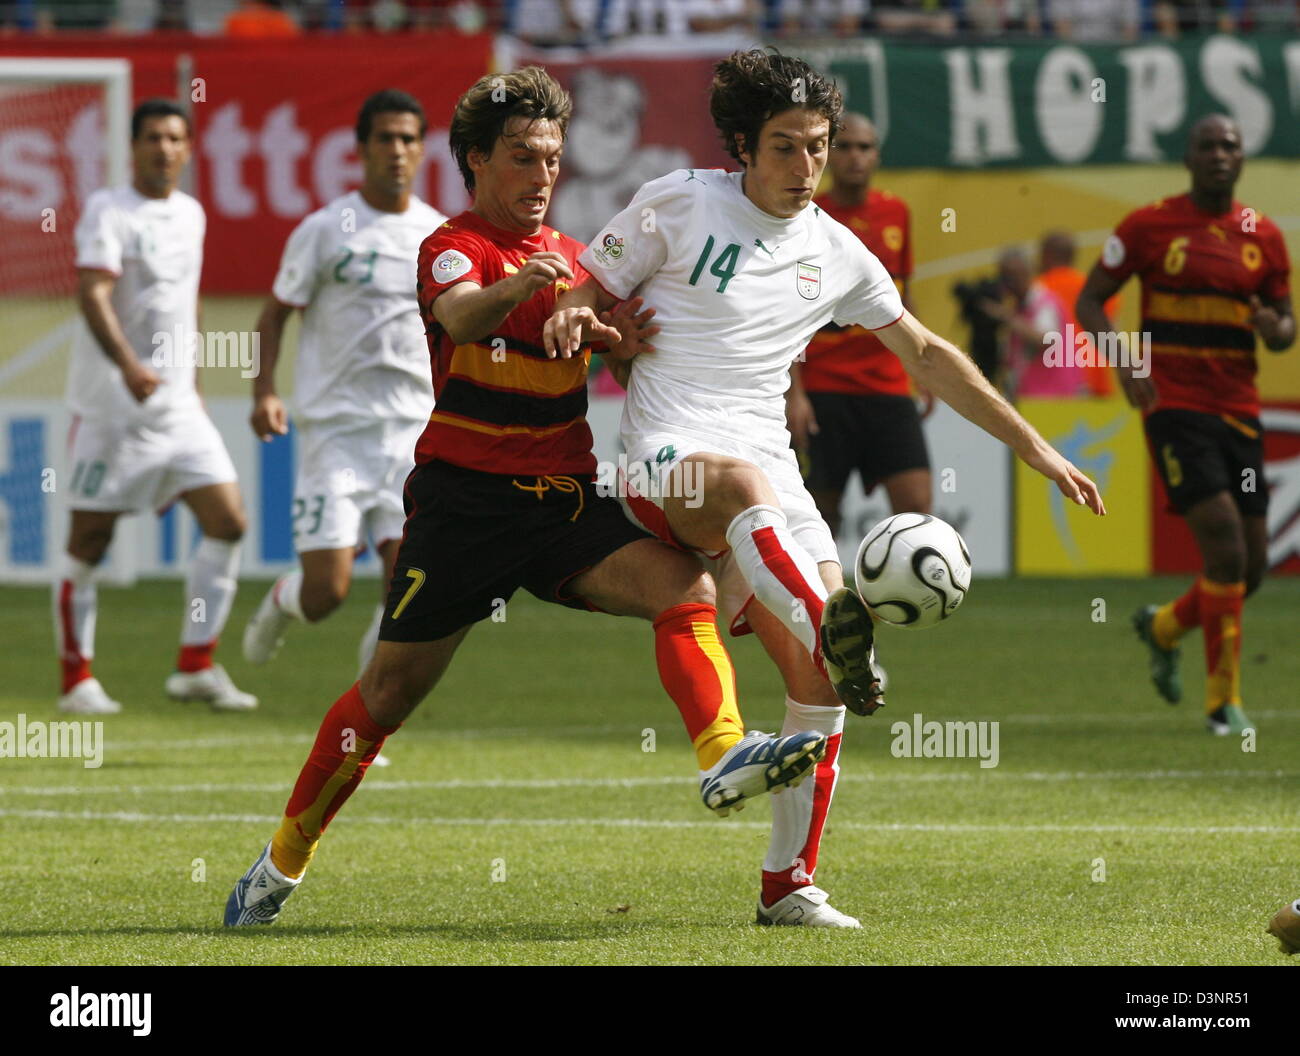 Figueiredo (L) of Angola vies for the ball with Andranik Teymourian of Iran during the group D preliminary match of 2006 FIFA World Cup Iran vs. Angola at the FIFA World Cup stadium in Leipzig, Germany, Wednesday, 21 June 2006. DPA/WOLFGANG KUMM +++ Mobile Services OUT +++ Please refer to FIFA's Terms and Conditions Stock Photo